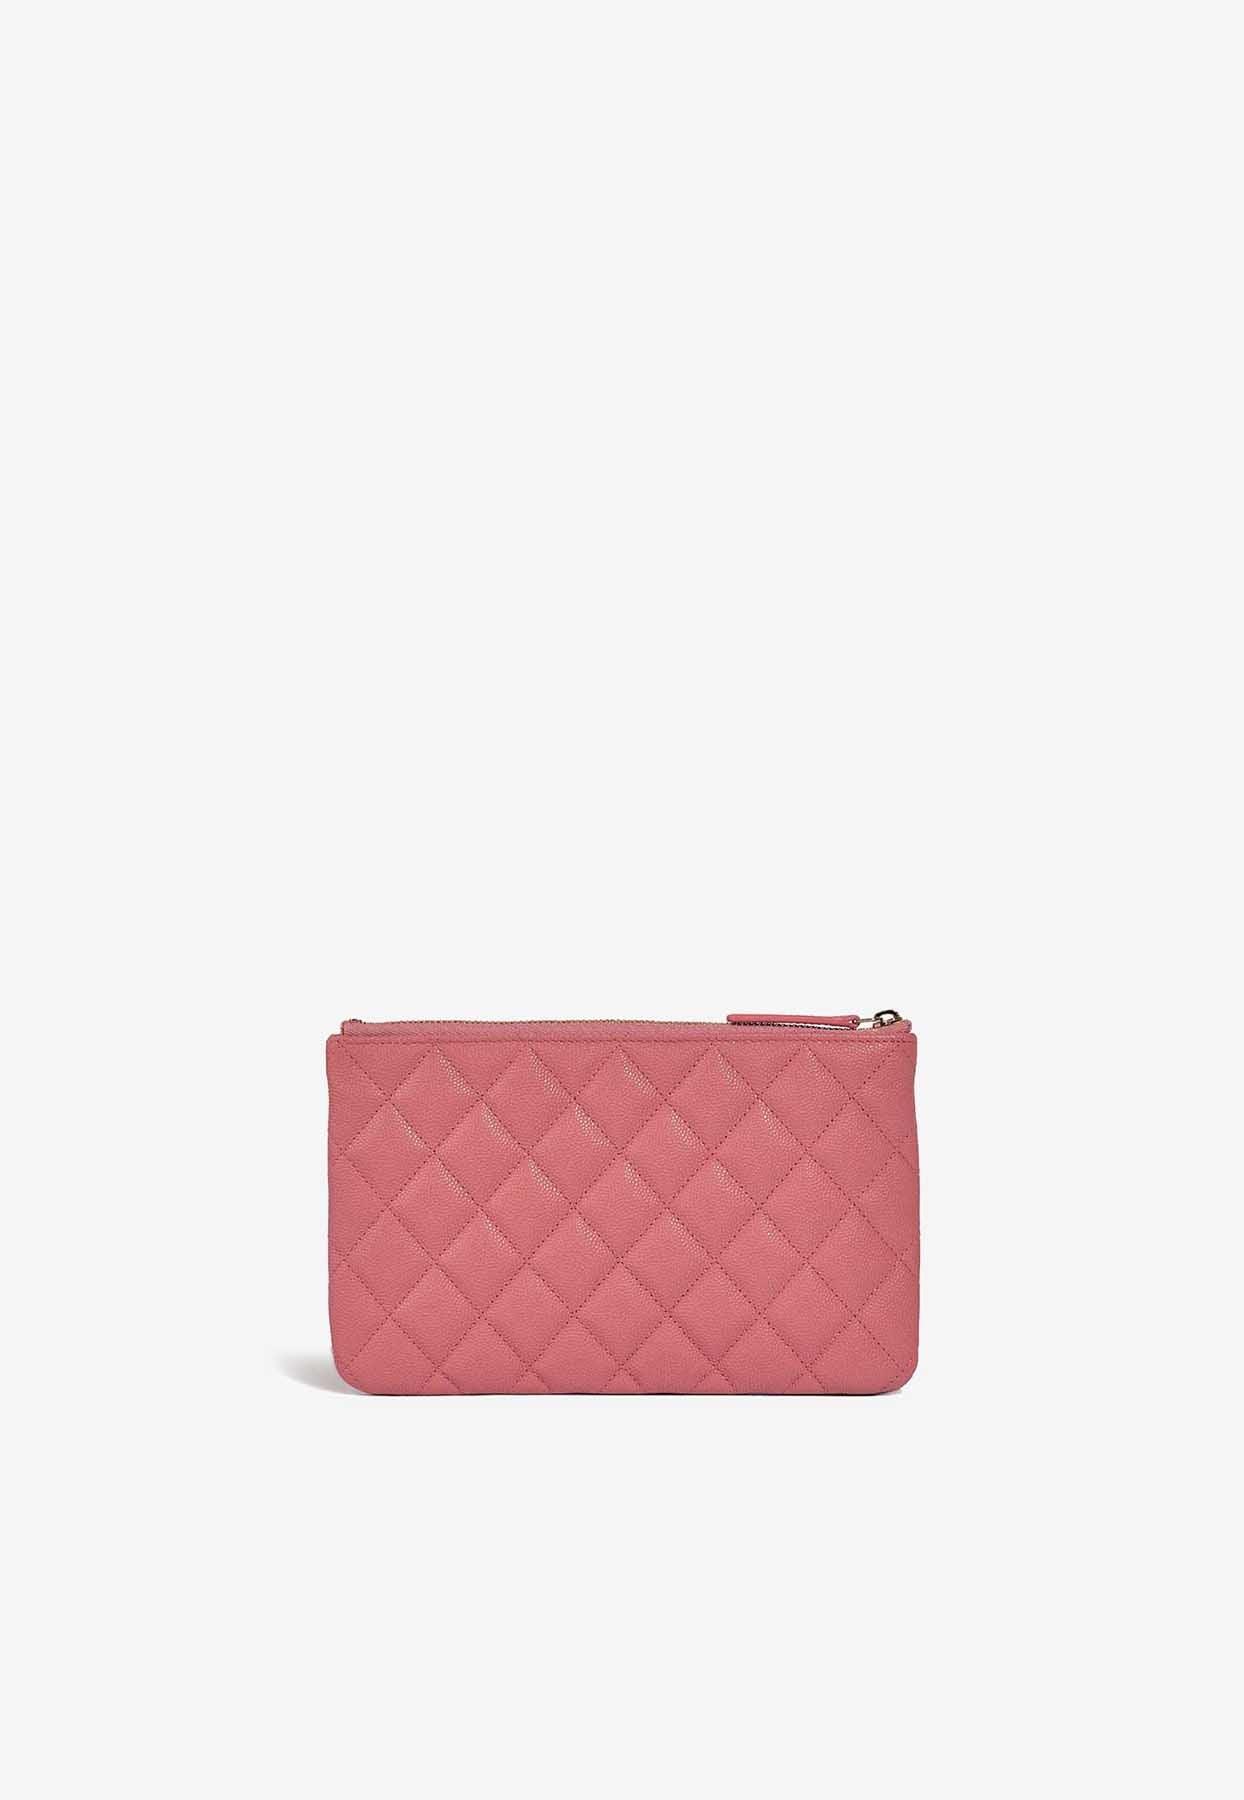 Chanel Timeless Clutch Bag In Rose Caviar Leather With Pale Gold Hardware  in Pink | Lyst